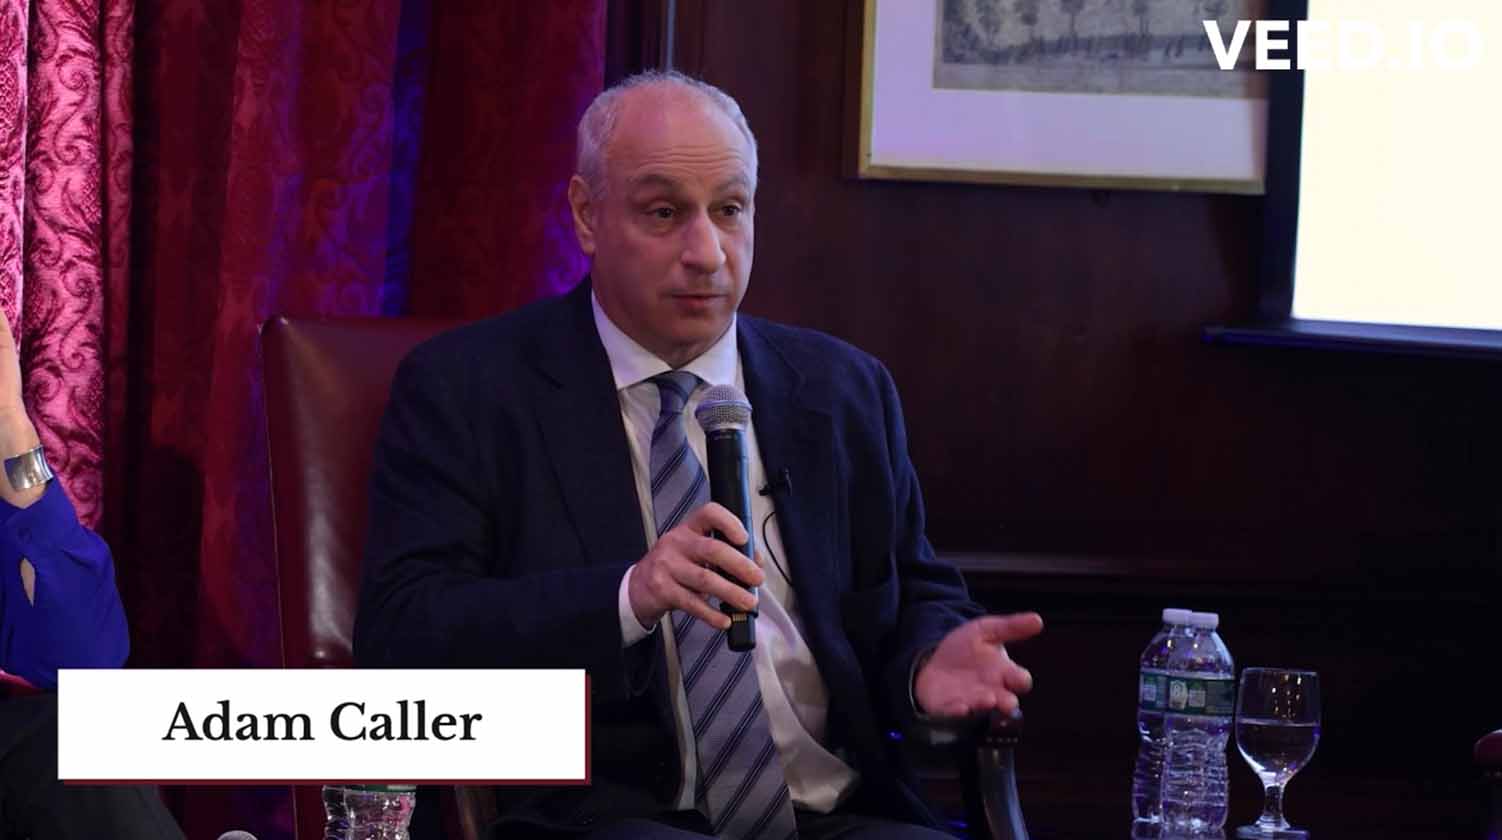 Watch Adam Caller discuss the social impact of homeschooling at the 2022 New York Prestel & Partner Family Office Forum, hosted by the Harvard Club.